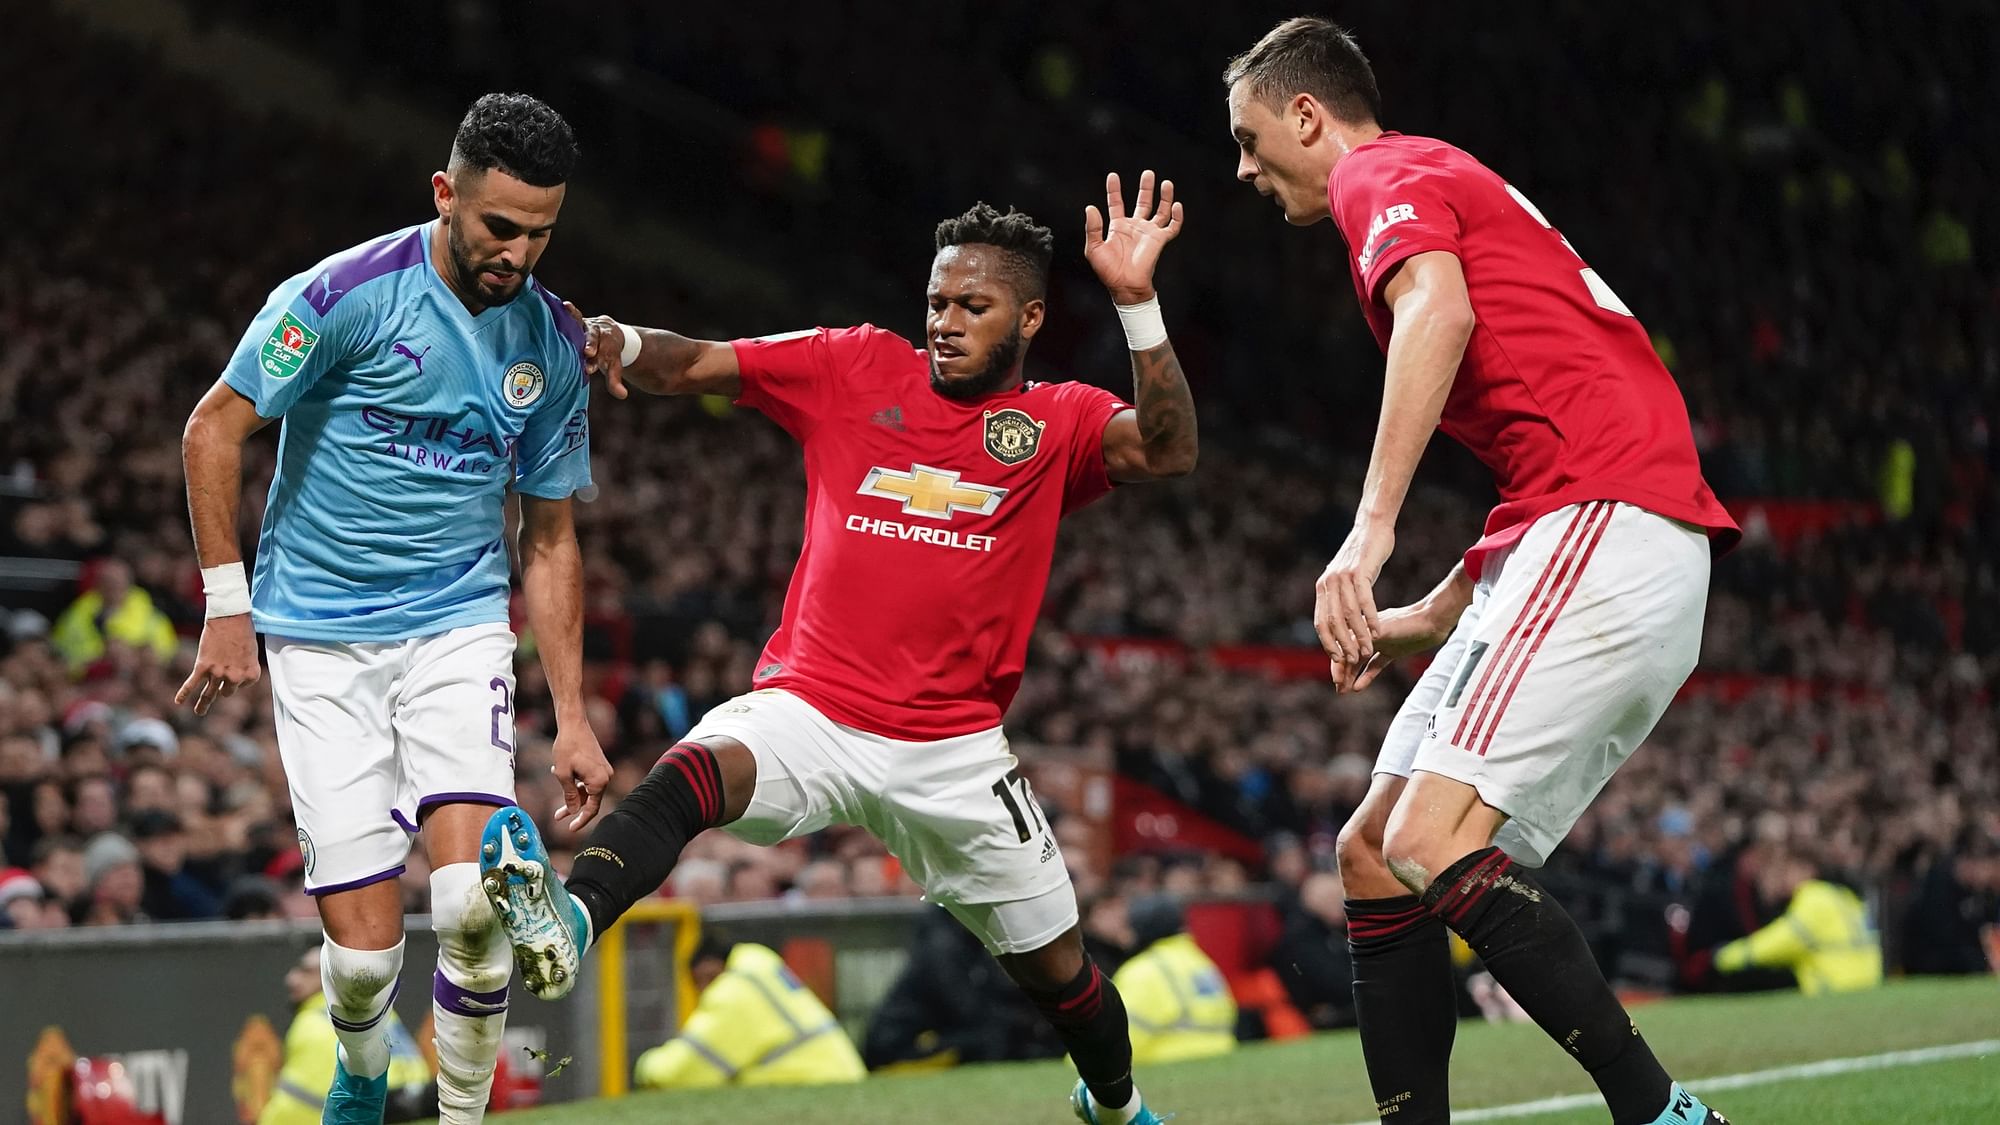 Trailing 3-0 at home to their fierce local rivals Manchester City, in a cup semifinal, Manchester United’s players were jeered by their own supporters as they traipsed off at halftime.